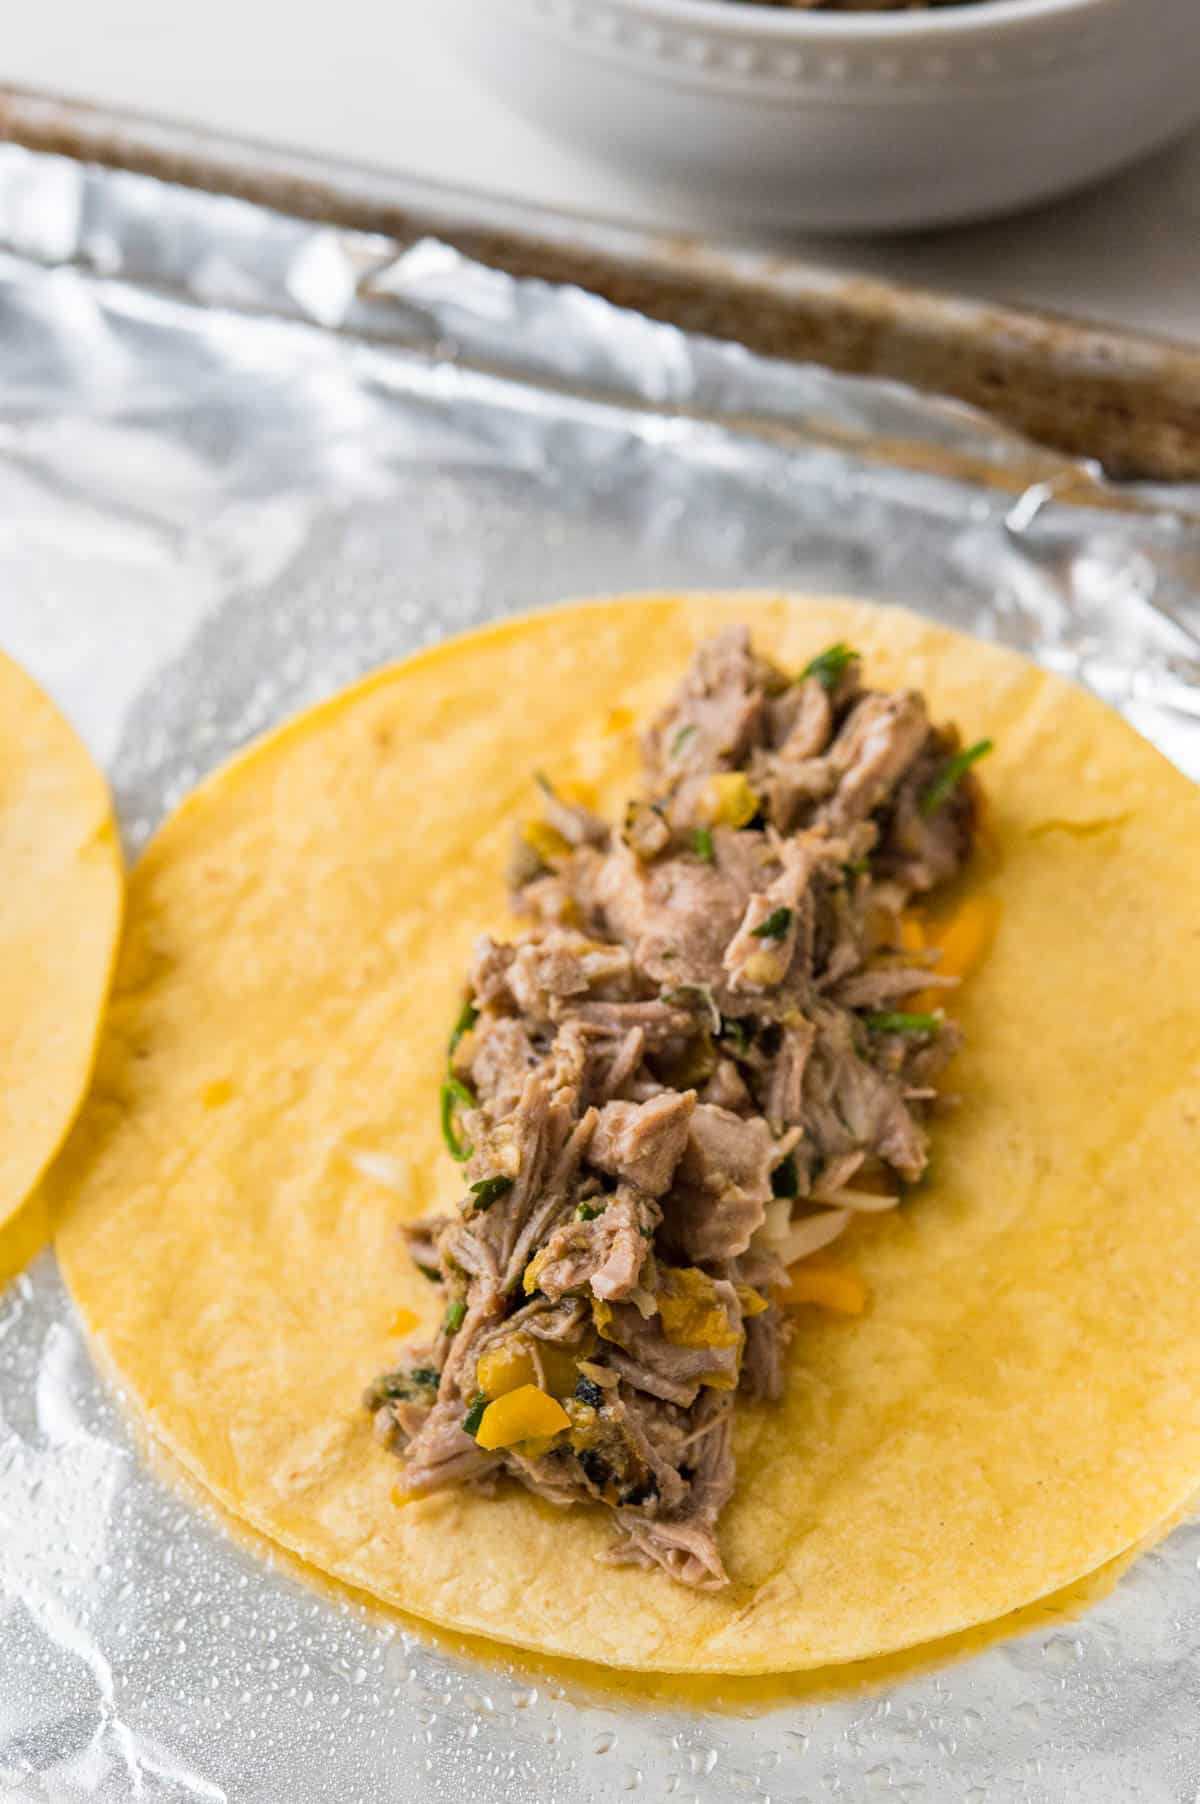 adding pulled pork to the tortilla.